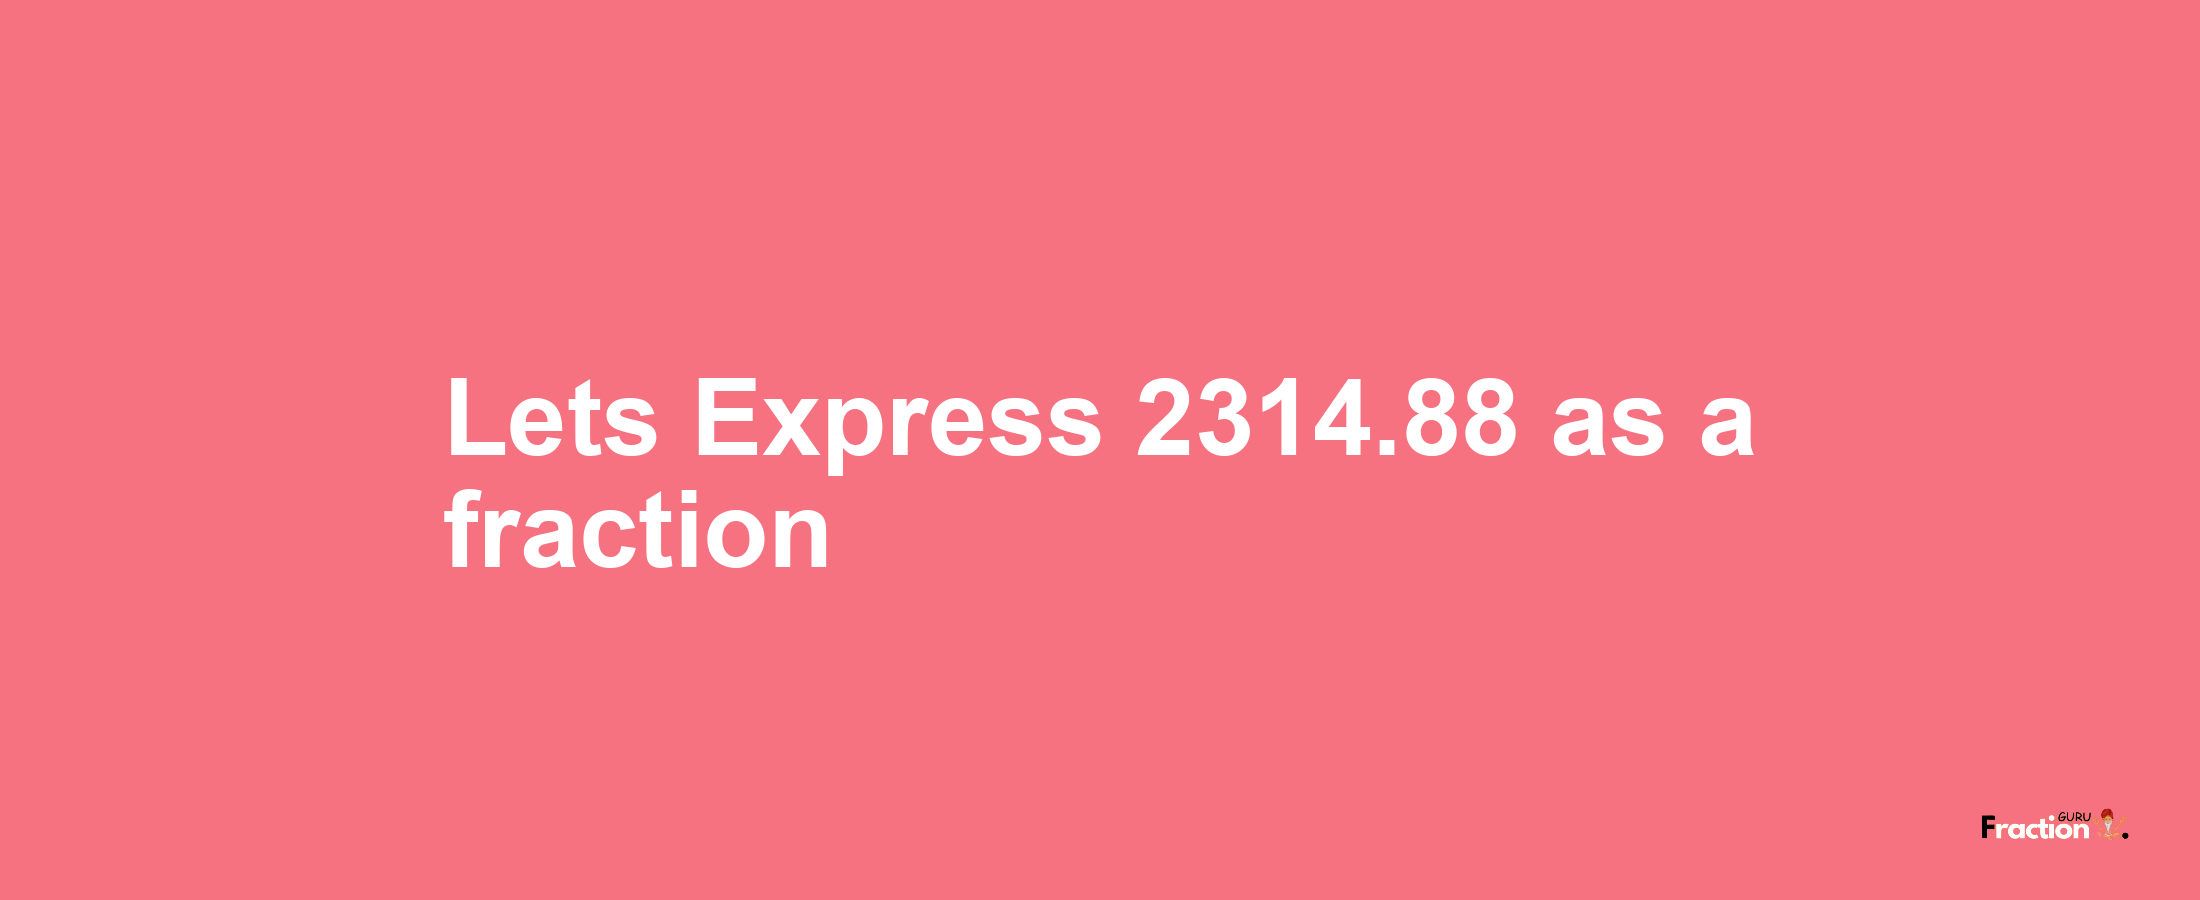 Lets Express 2314.88 as afraction